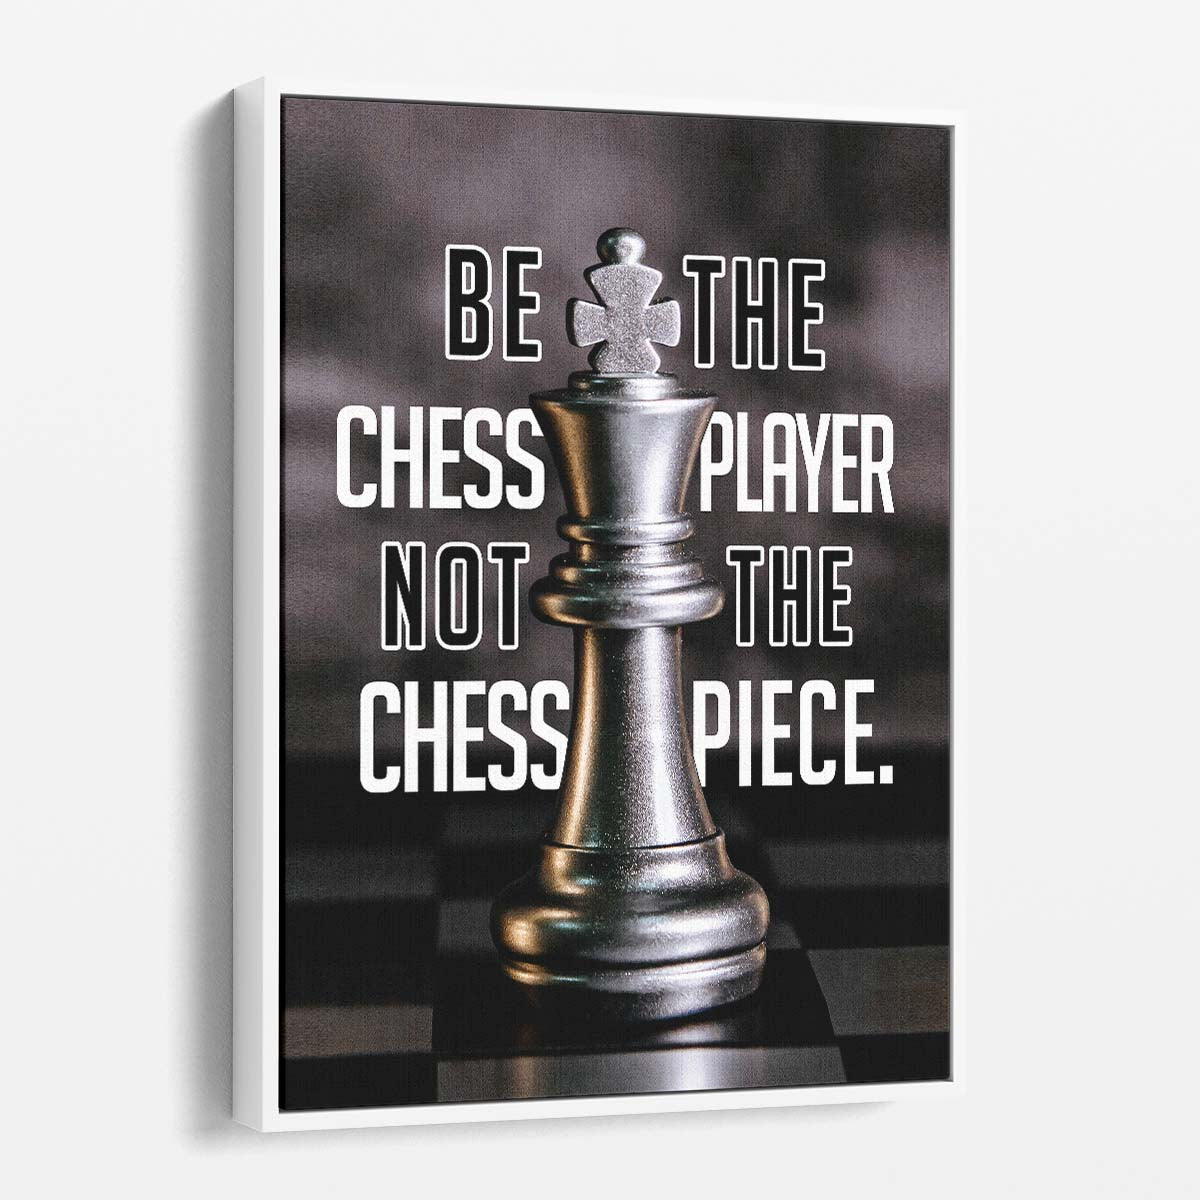 Be The Chess Player Not The Piece Wall Art by Luxuriance Designs. Made in USA.